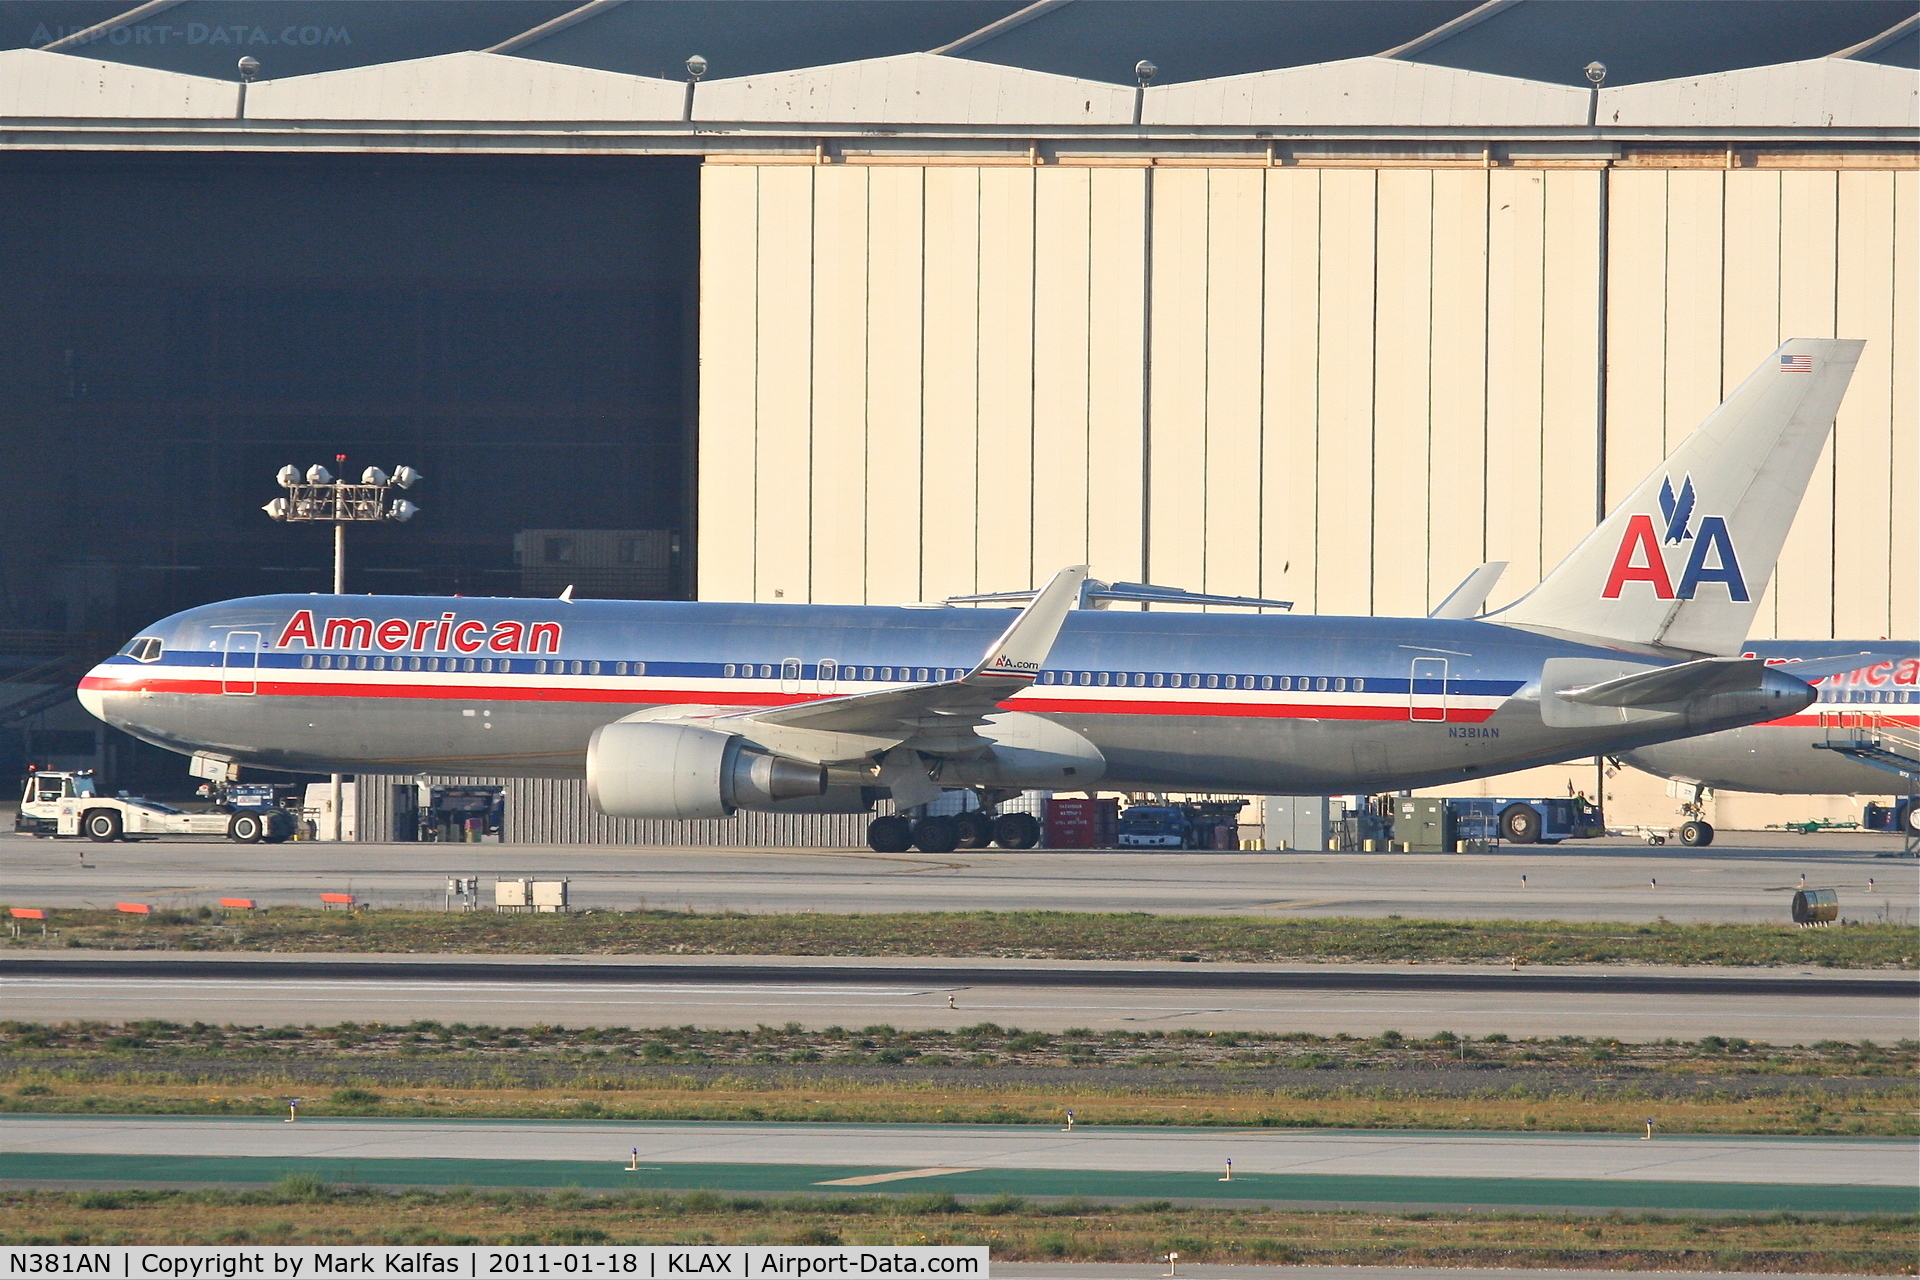 N381AN, 1993 Boeing 767-323 C/N 25450, American Airlines Boeing 767-323, getting a tow to the AA maintenance hangar at KLAX.